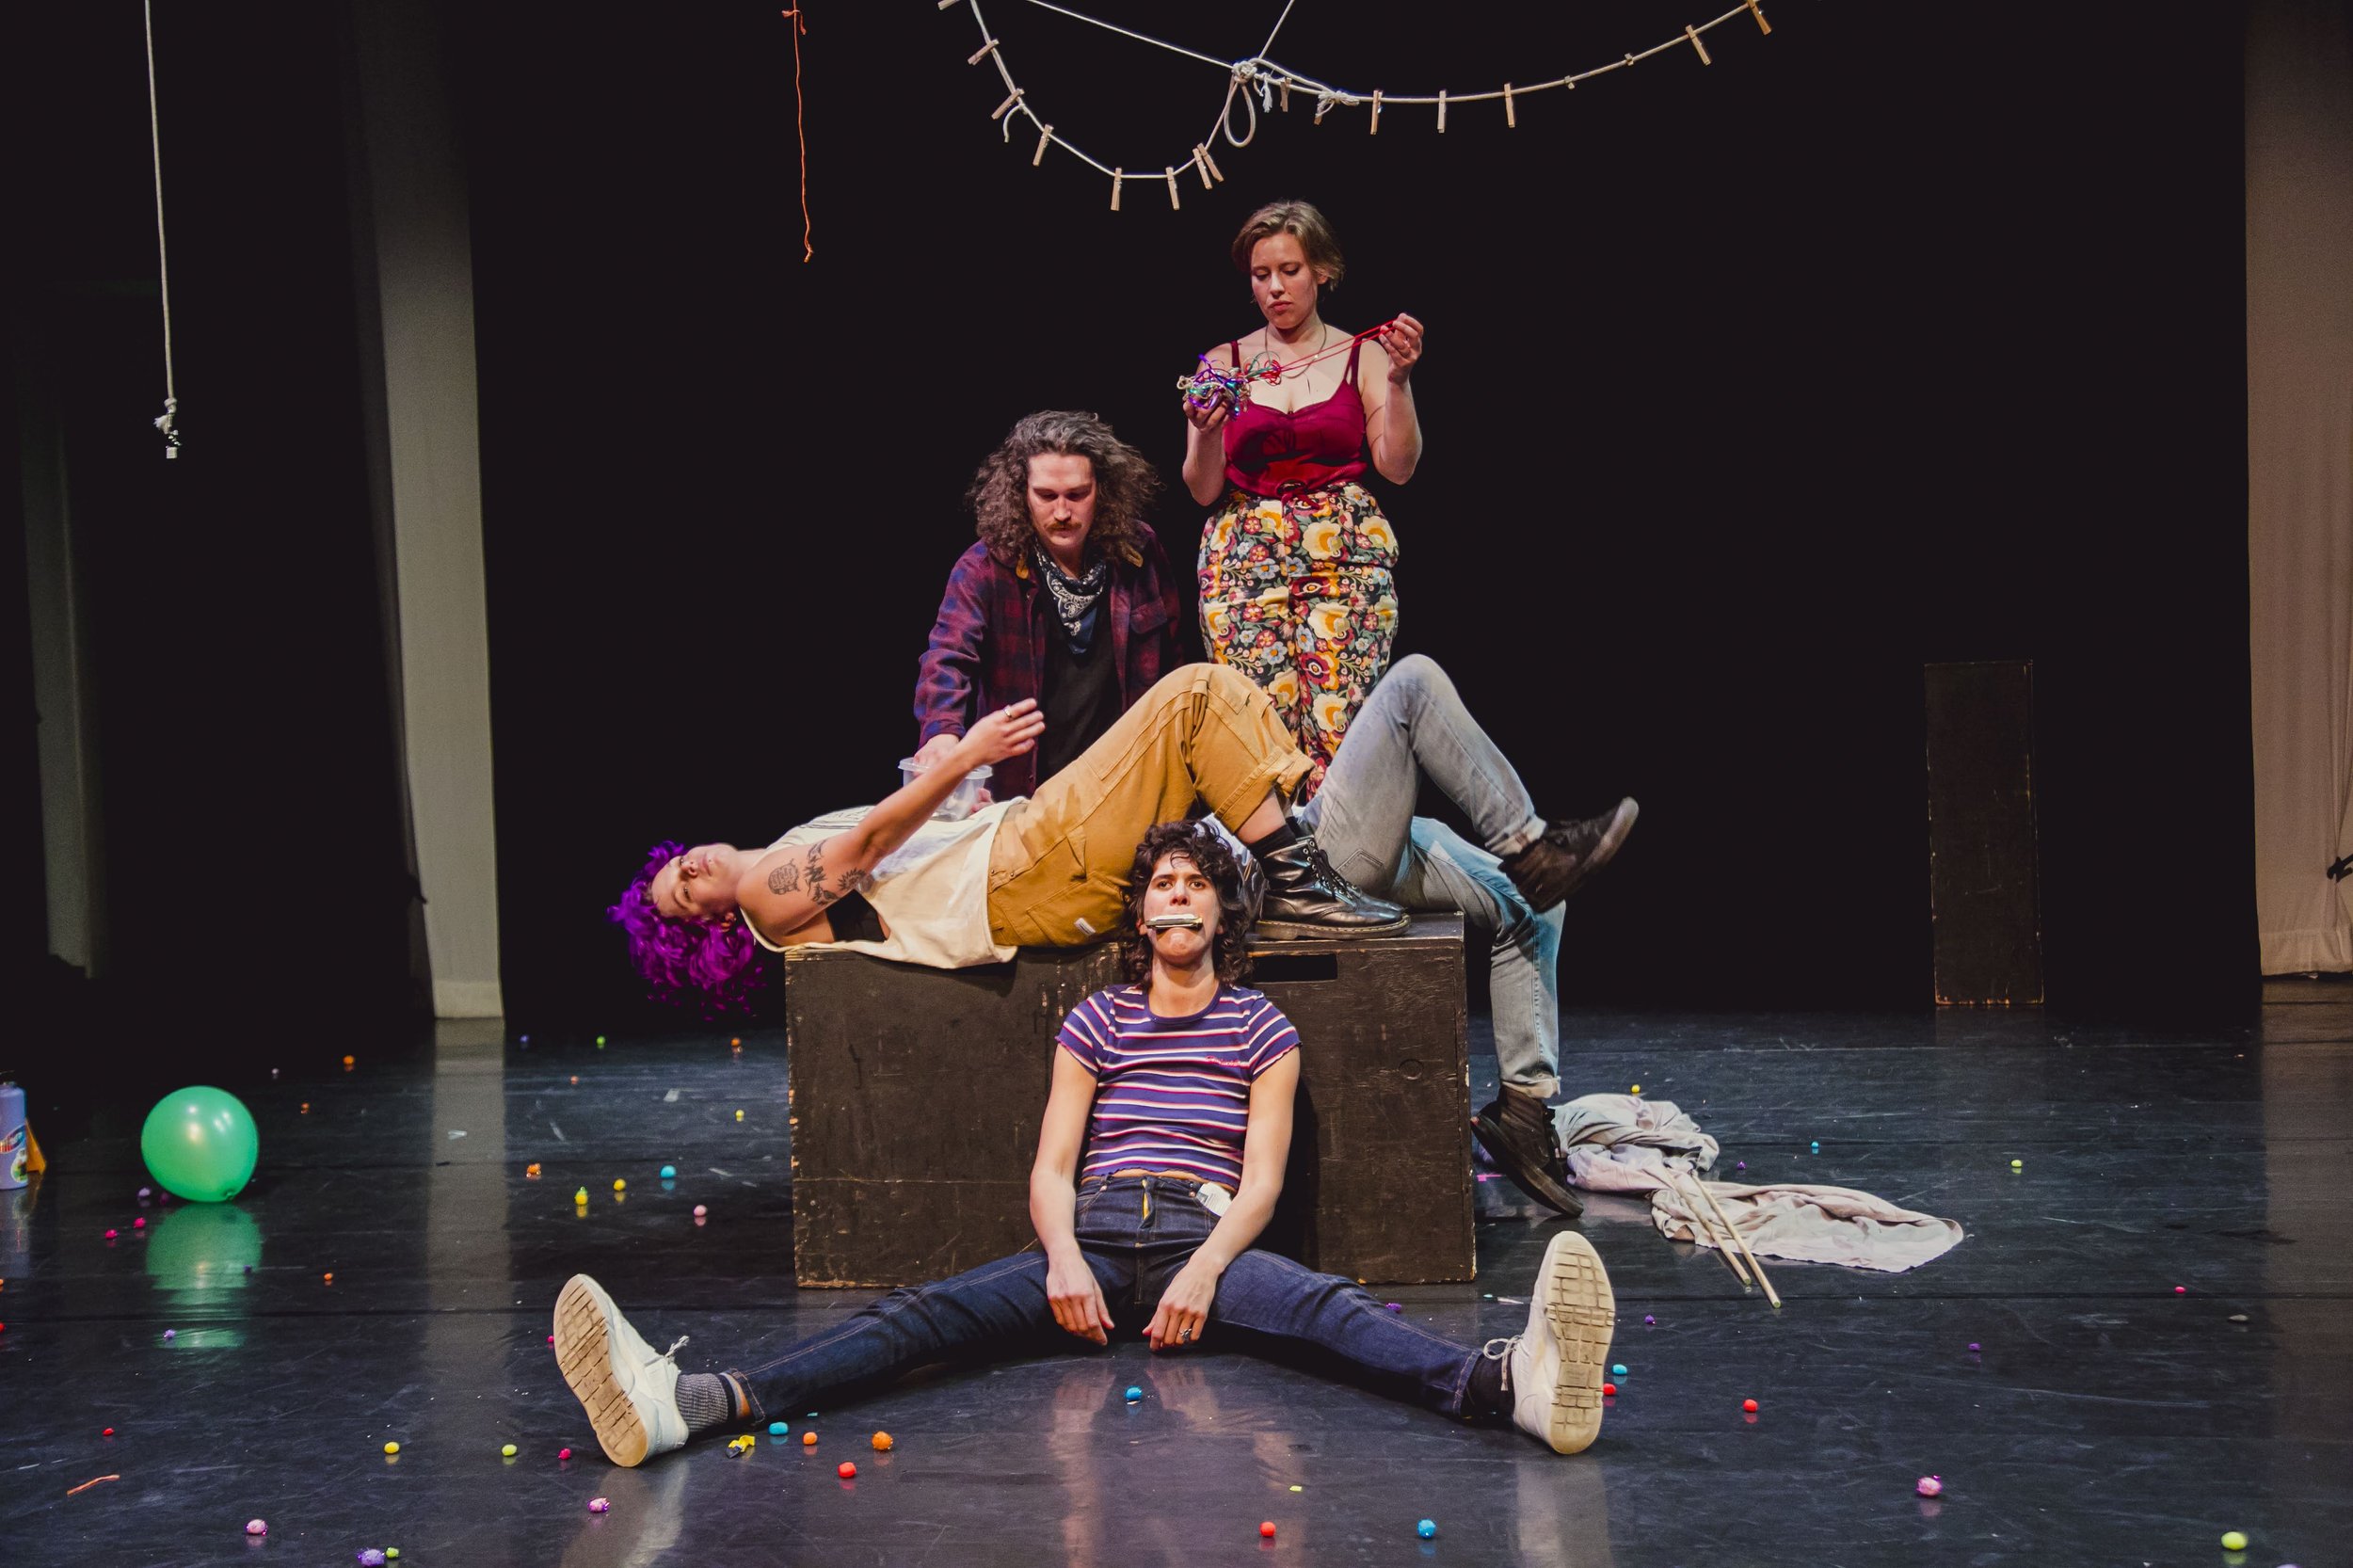 (front to back, L to R) Geulah Finman, jeb, Sam Bertken, Willie Caldwell, and Hannah Cantor in "I contain, or, how to be a living creature"